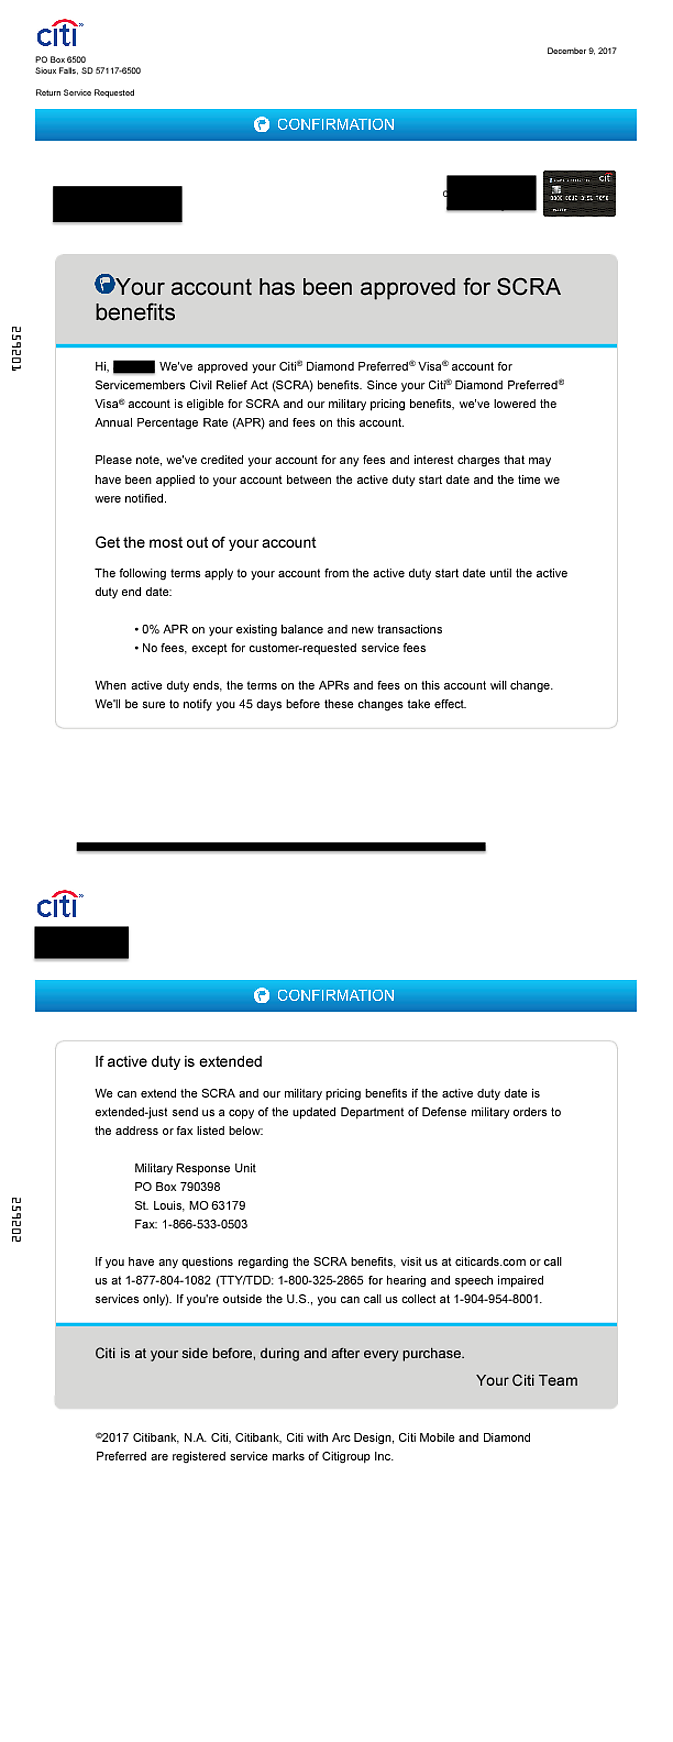 An email from Citi to Reddit user u/monkeyfrenzy confirming their Citi Diamond Preferred Visa card has been approved for SCRA benefits.